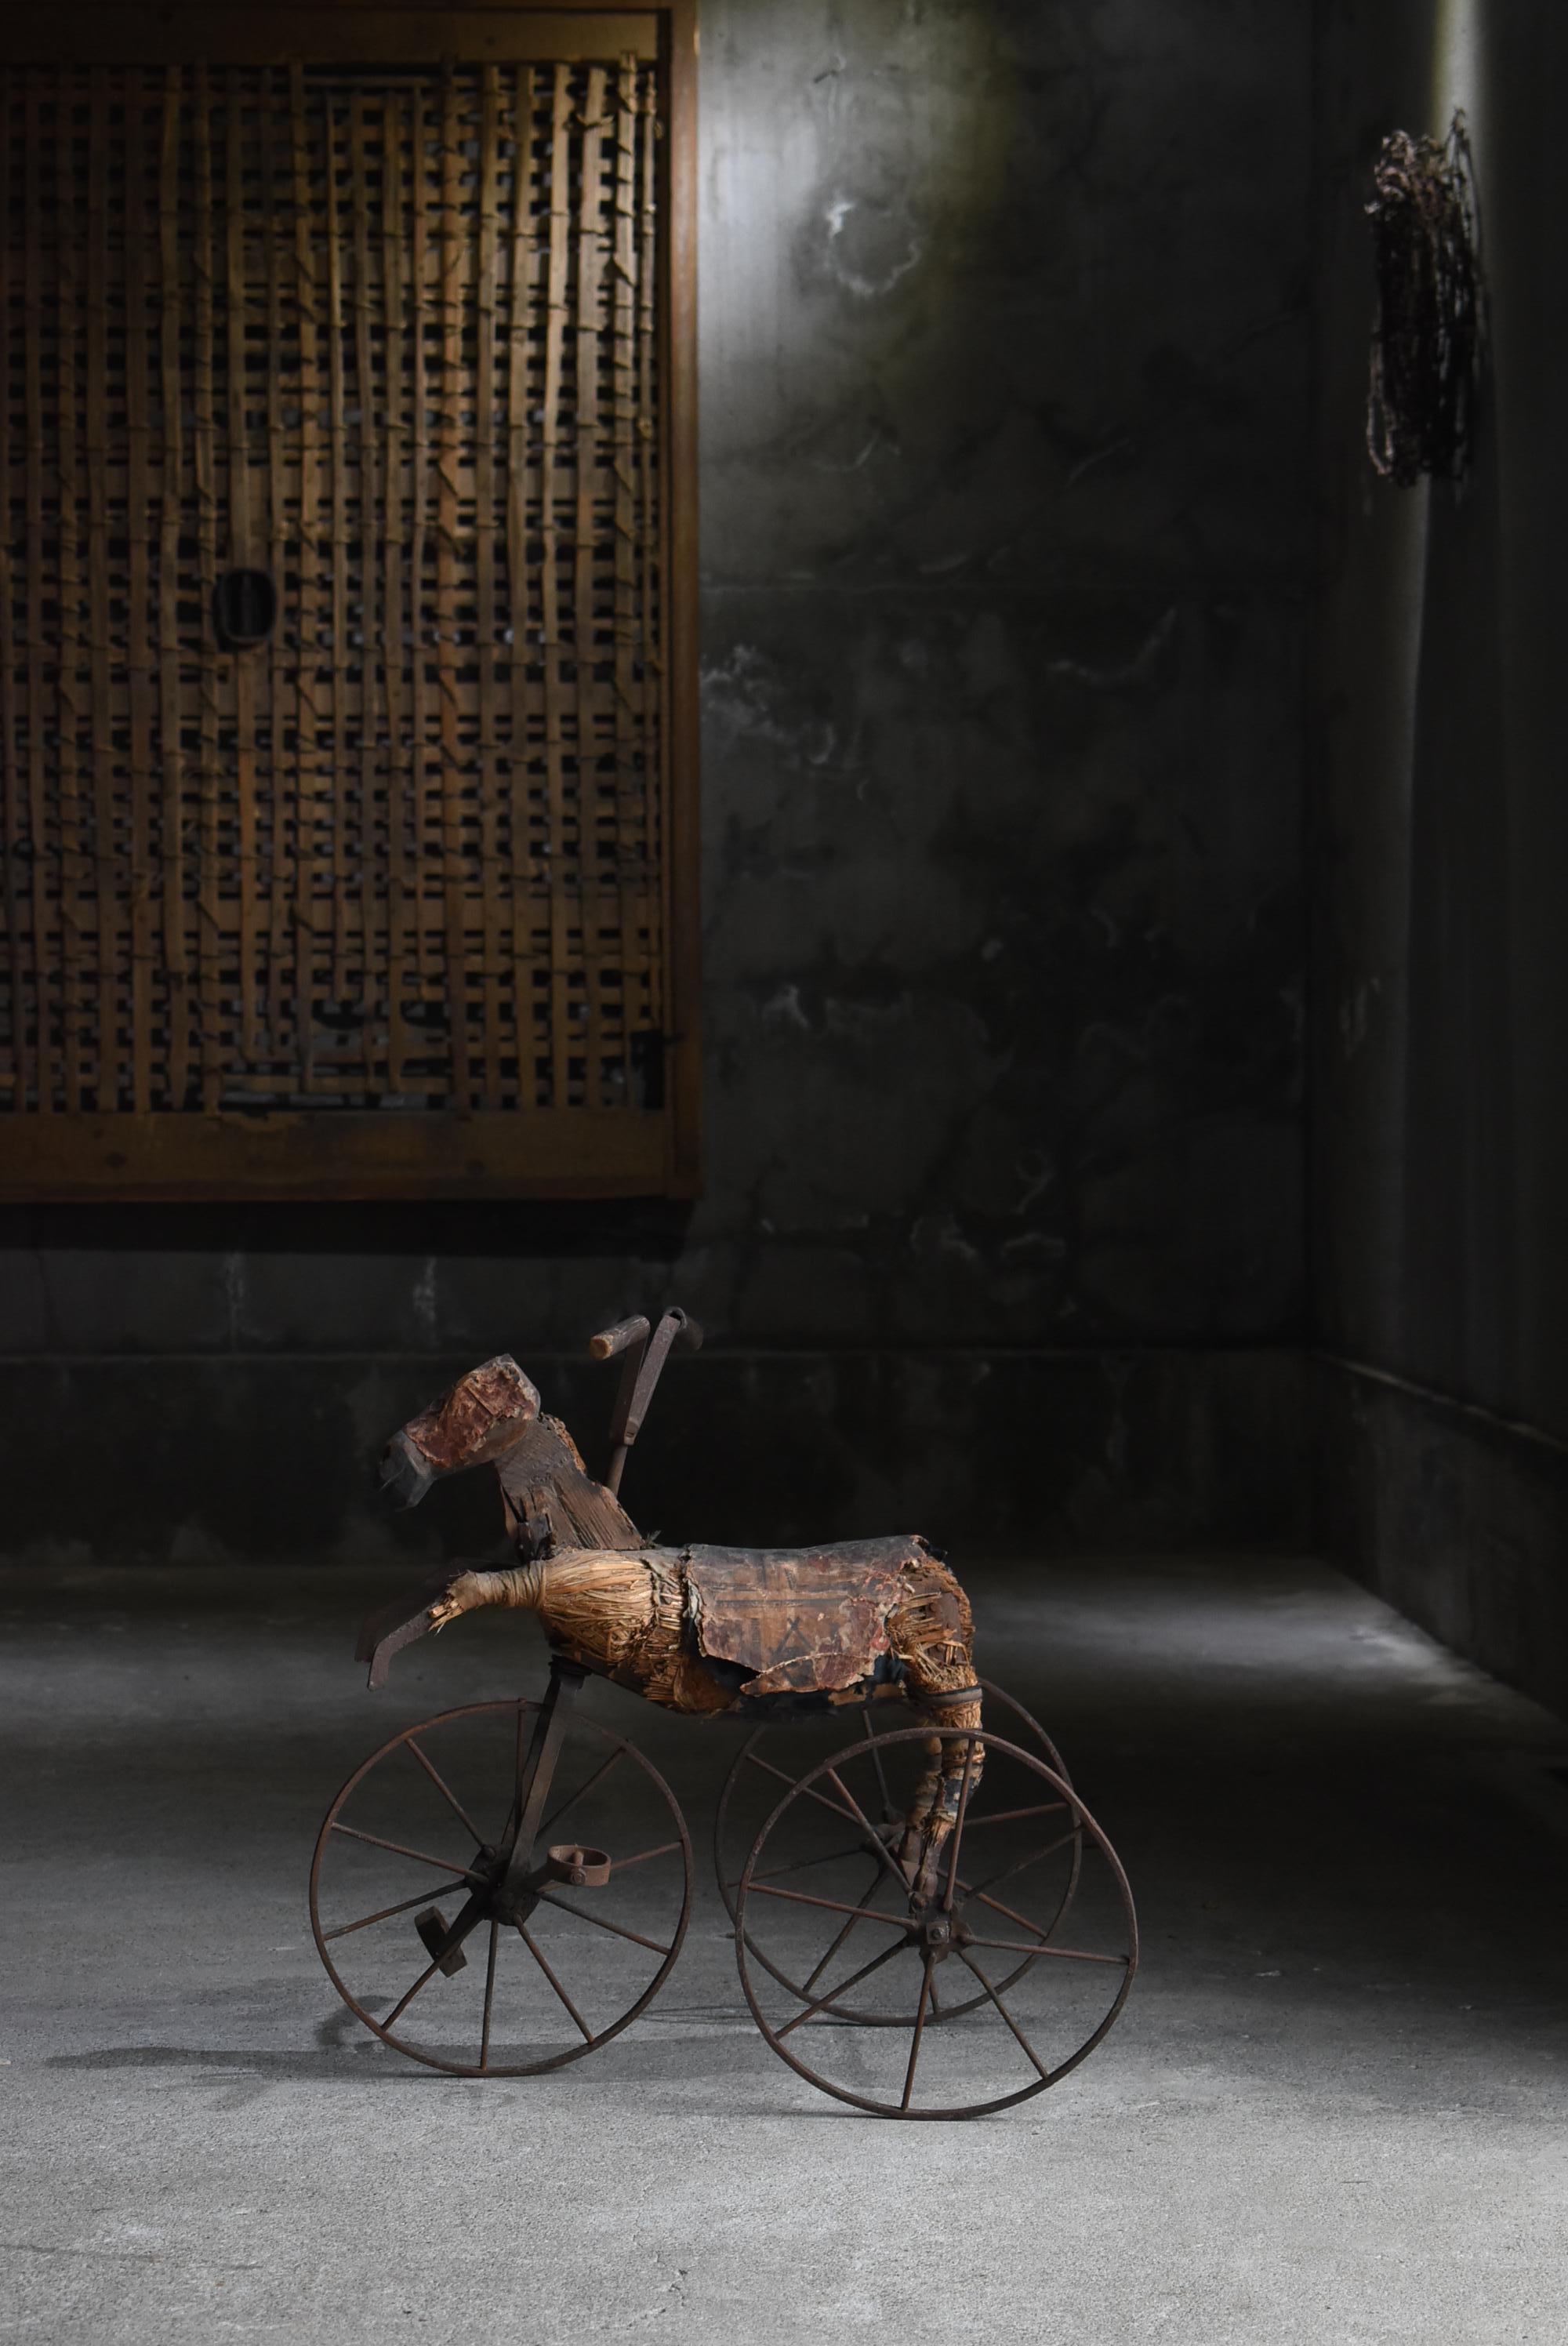 Very old tricycle with wooden horse made in Japan.
It is from the Meiji period (1860s-1900s).
It is made of iron, cedar wood, straw, and paper.

In Japan at that time, only a few wealthy people could play with this kind of toy.
Japan was in such a